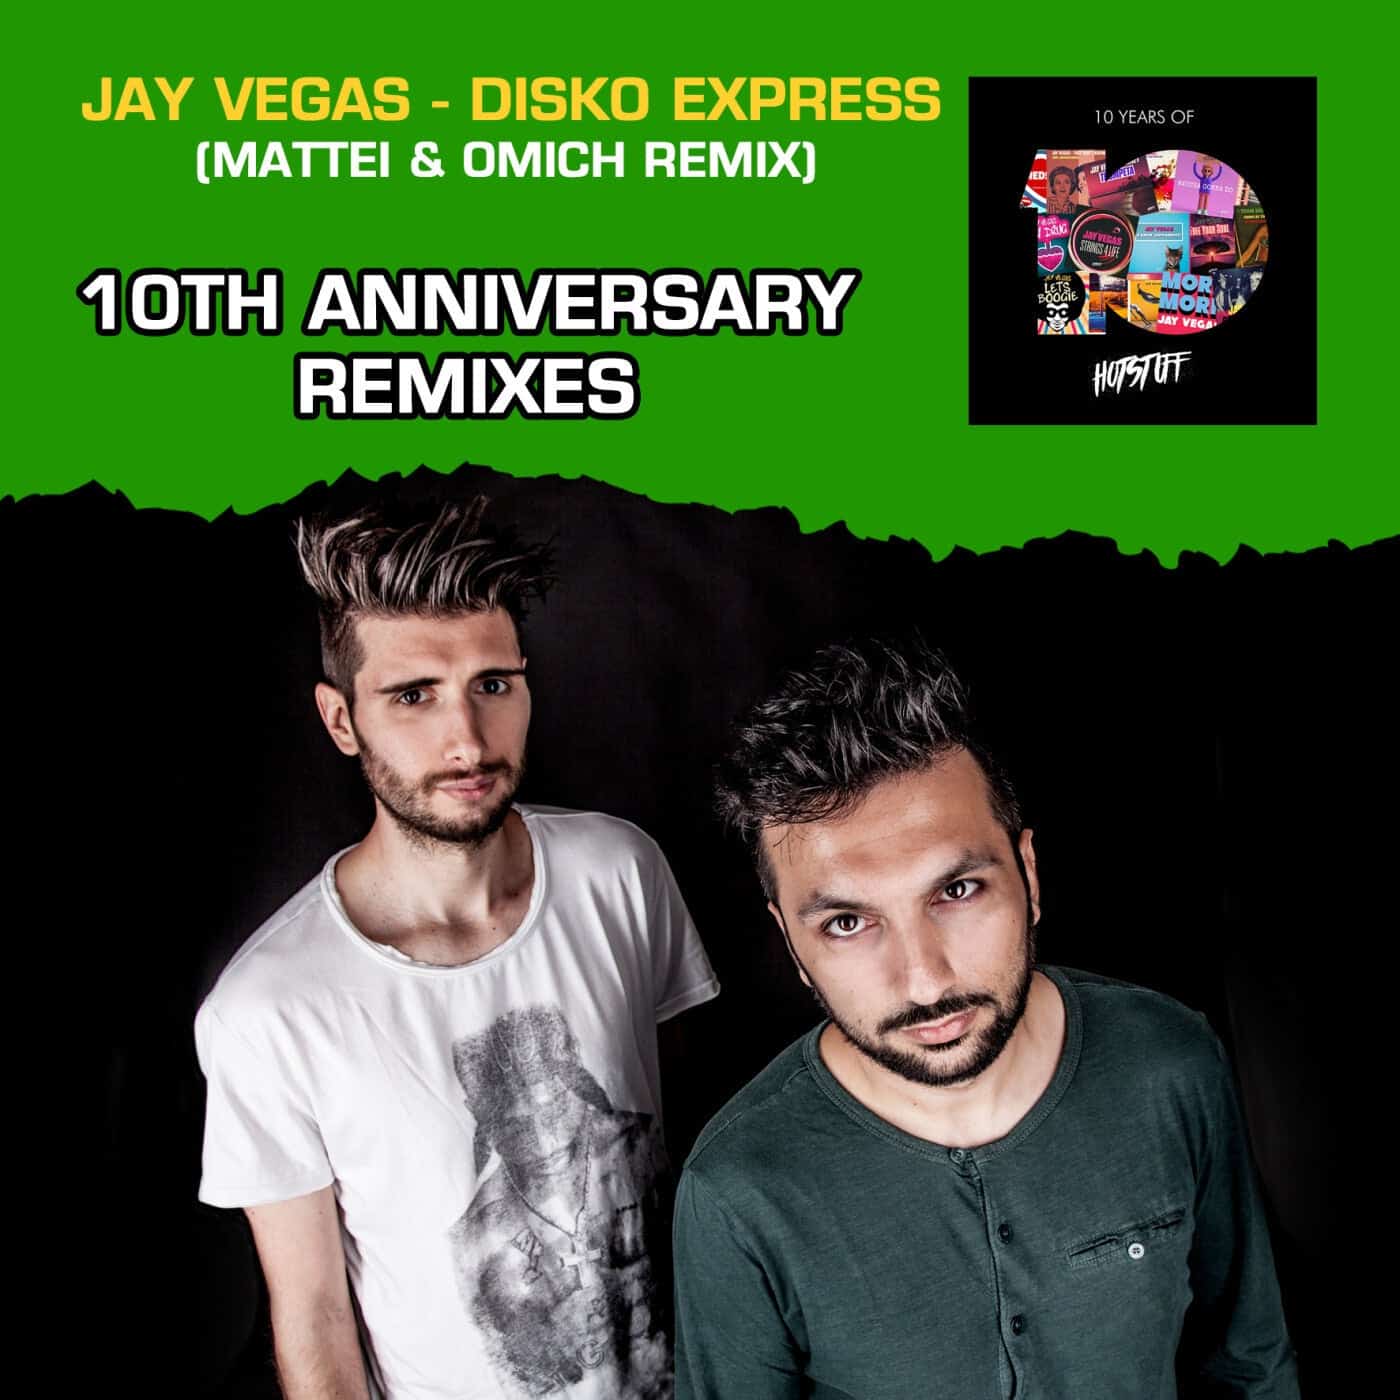 image cover: Disko Express (10th Anniversary Remixes) by Jay Vegas on Hot Stuff